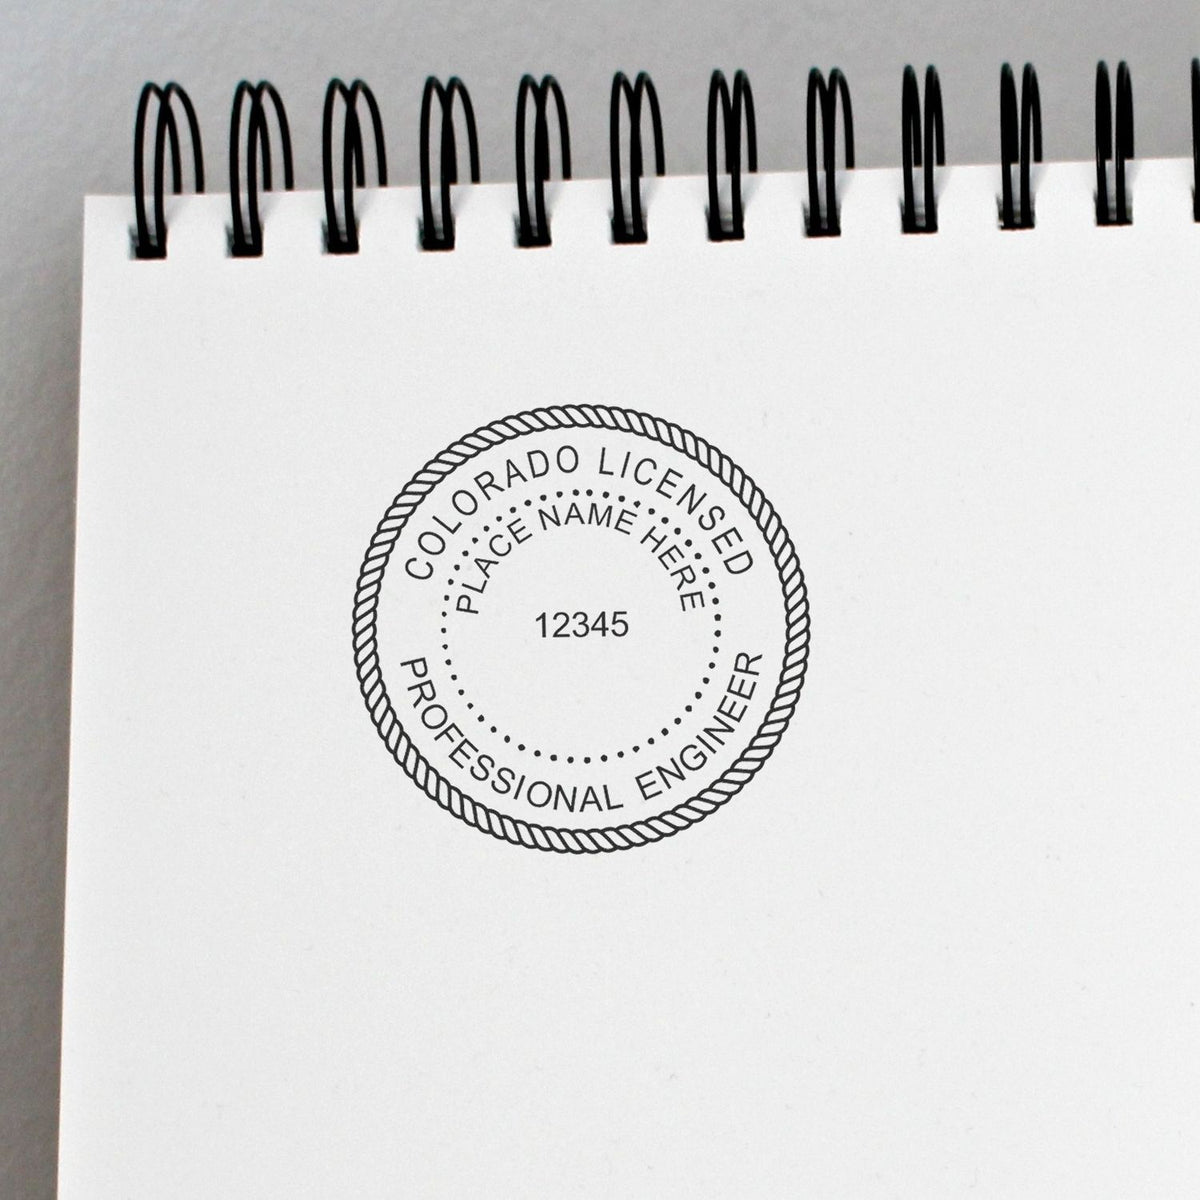 A stamped impression of the Colorado Professional Engineer Seal Stamp in this stylish lifestyle photo, setting the tone for a unique and personalized product.